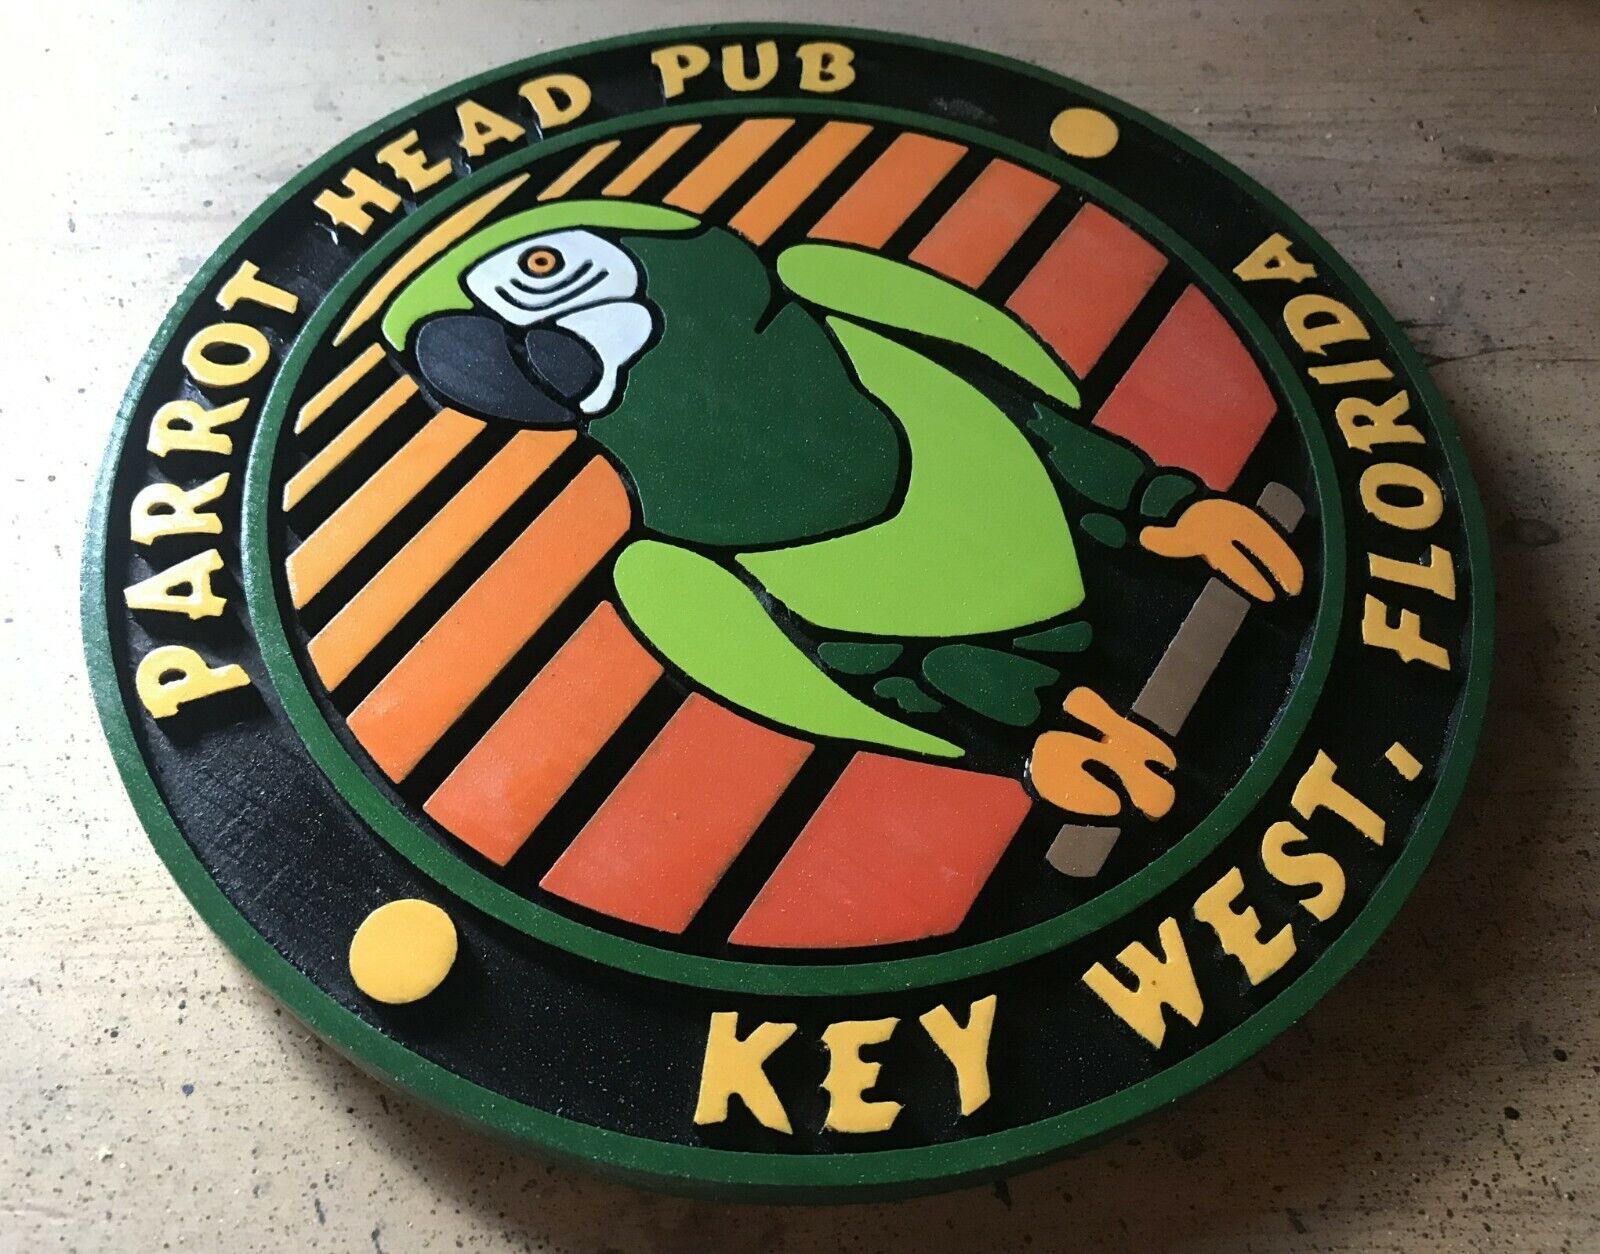 Key West Parrot Head Pub 3D routed carved wood island tiki bar sign Custom